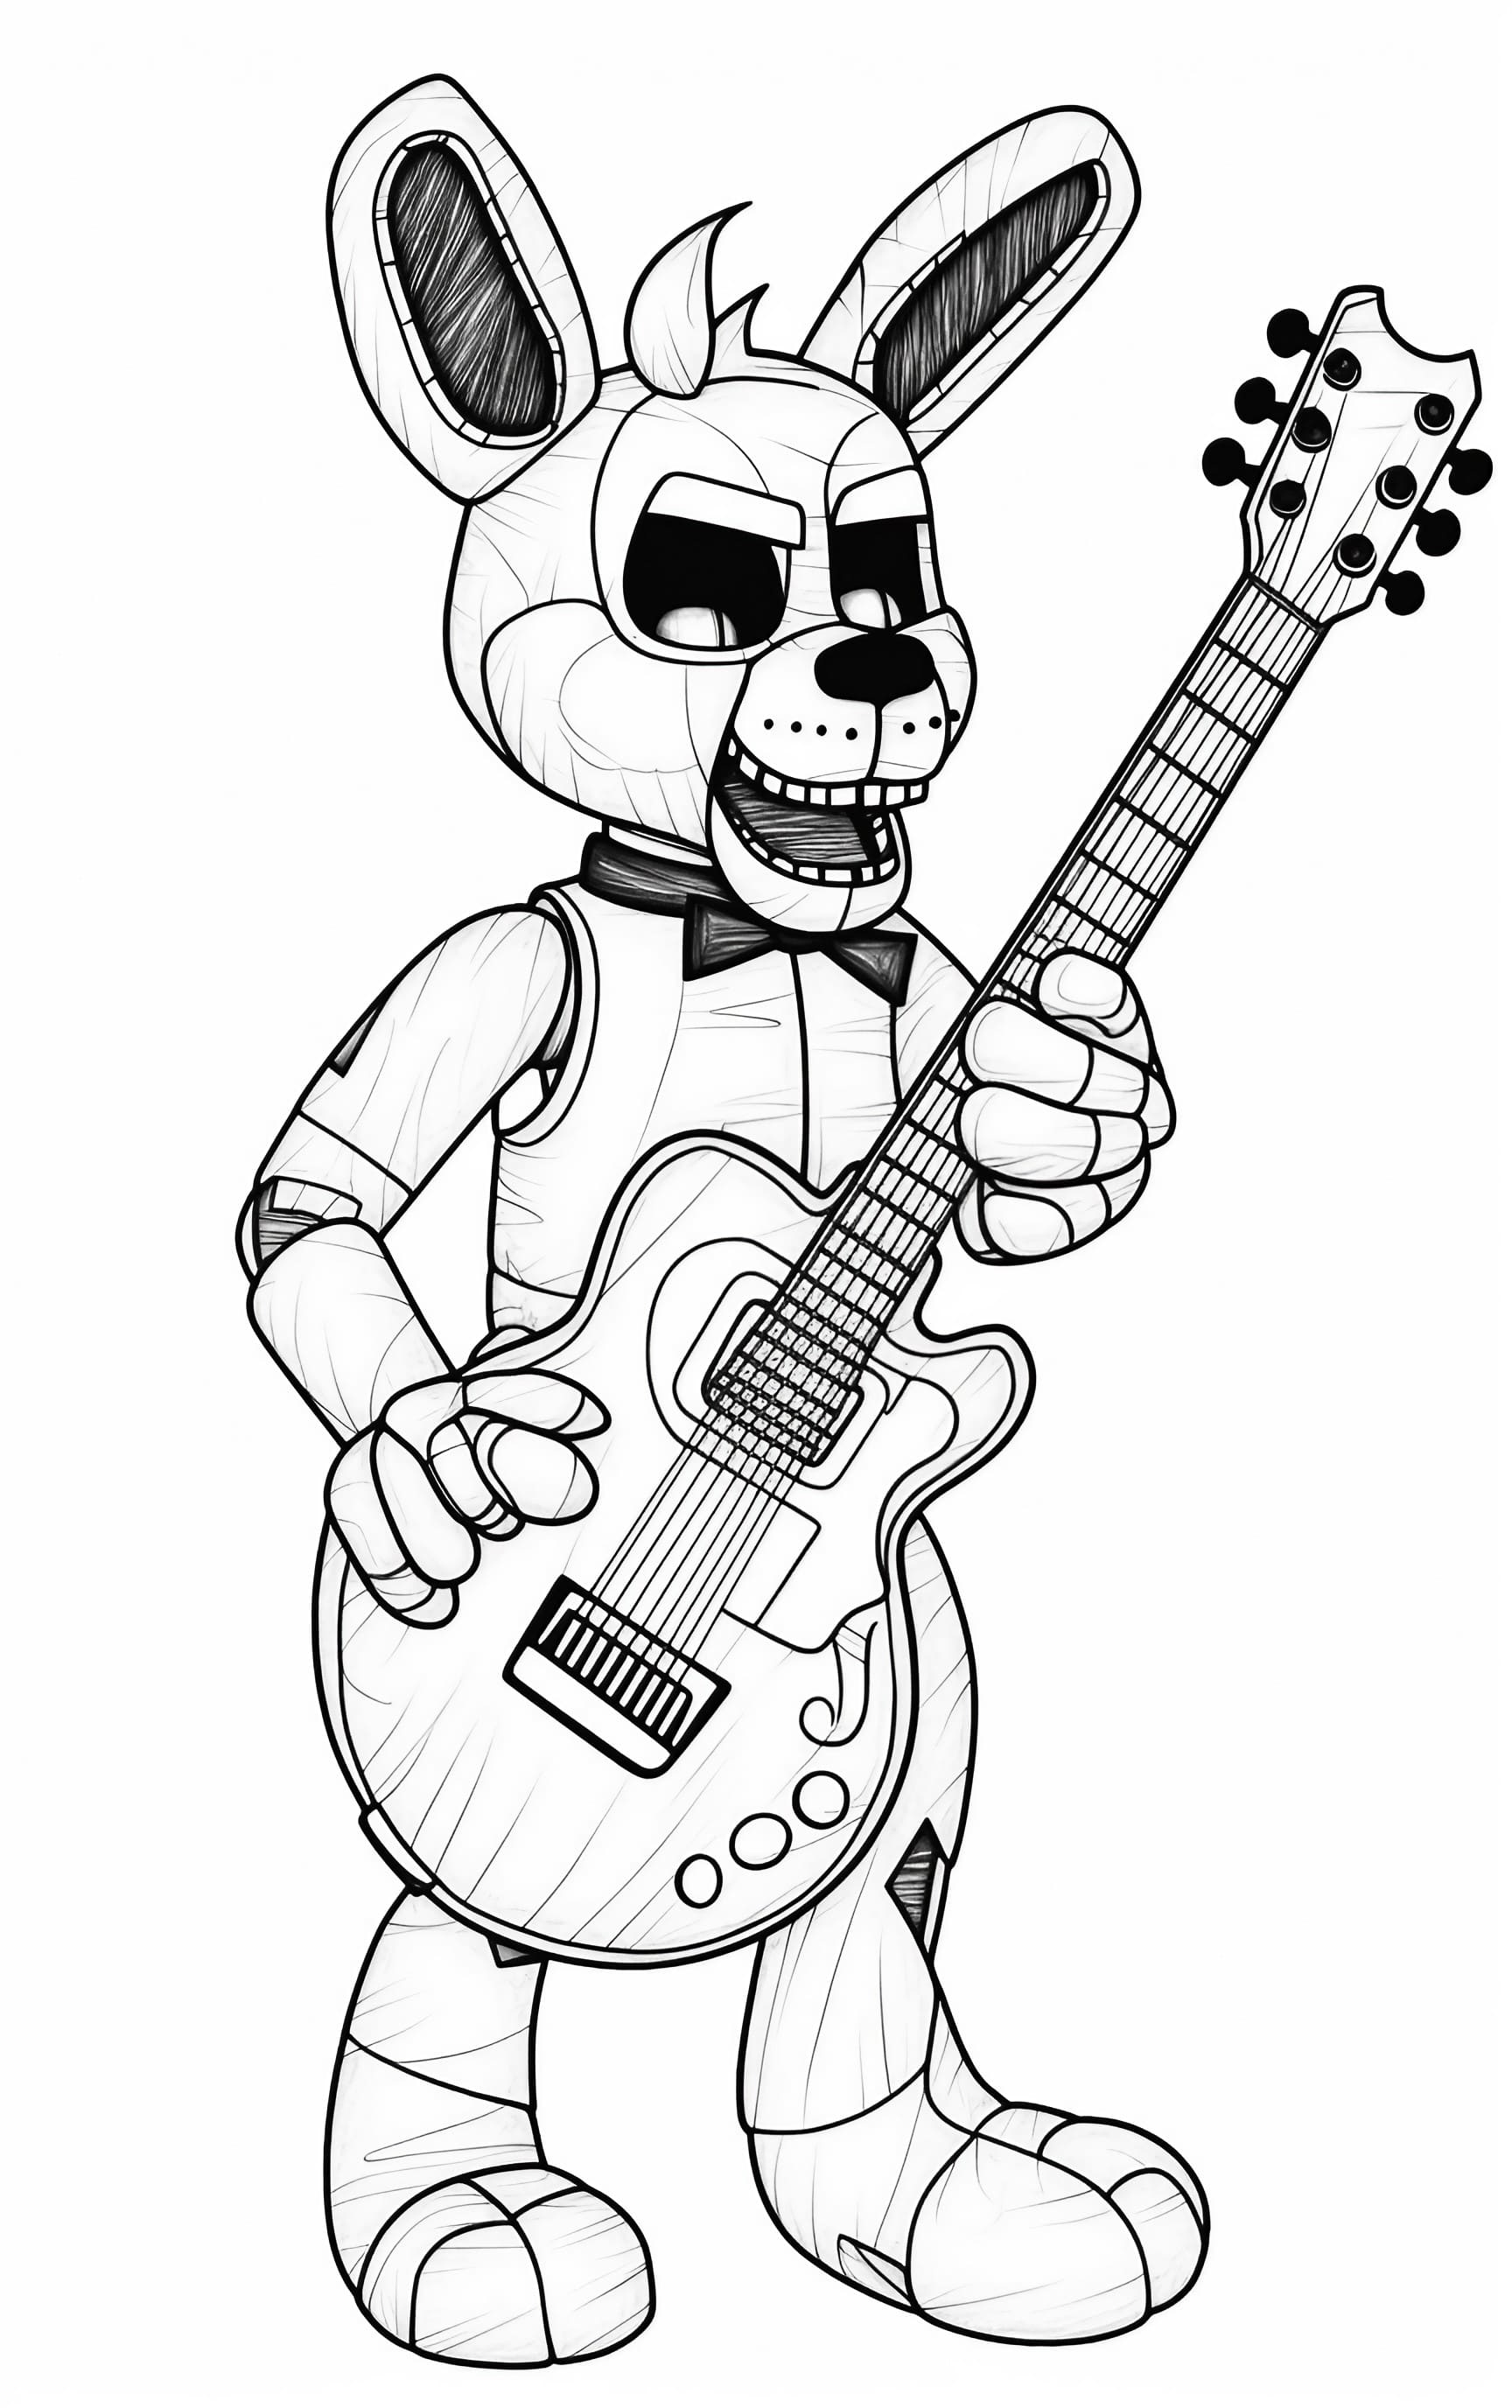 Fnaf coloring pages for free printable